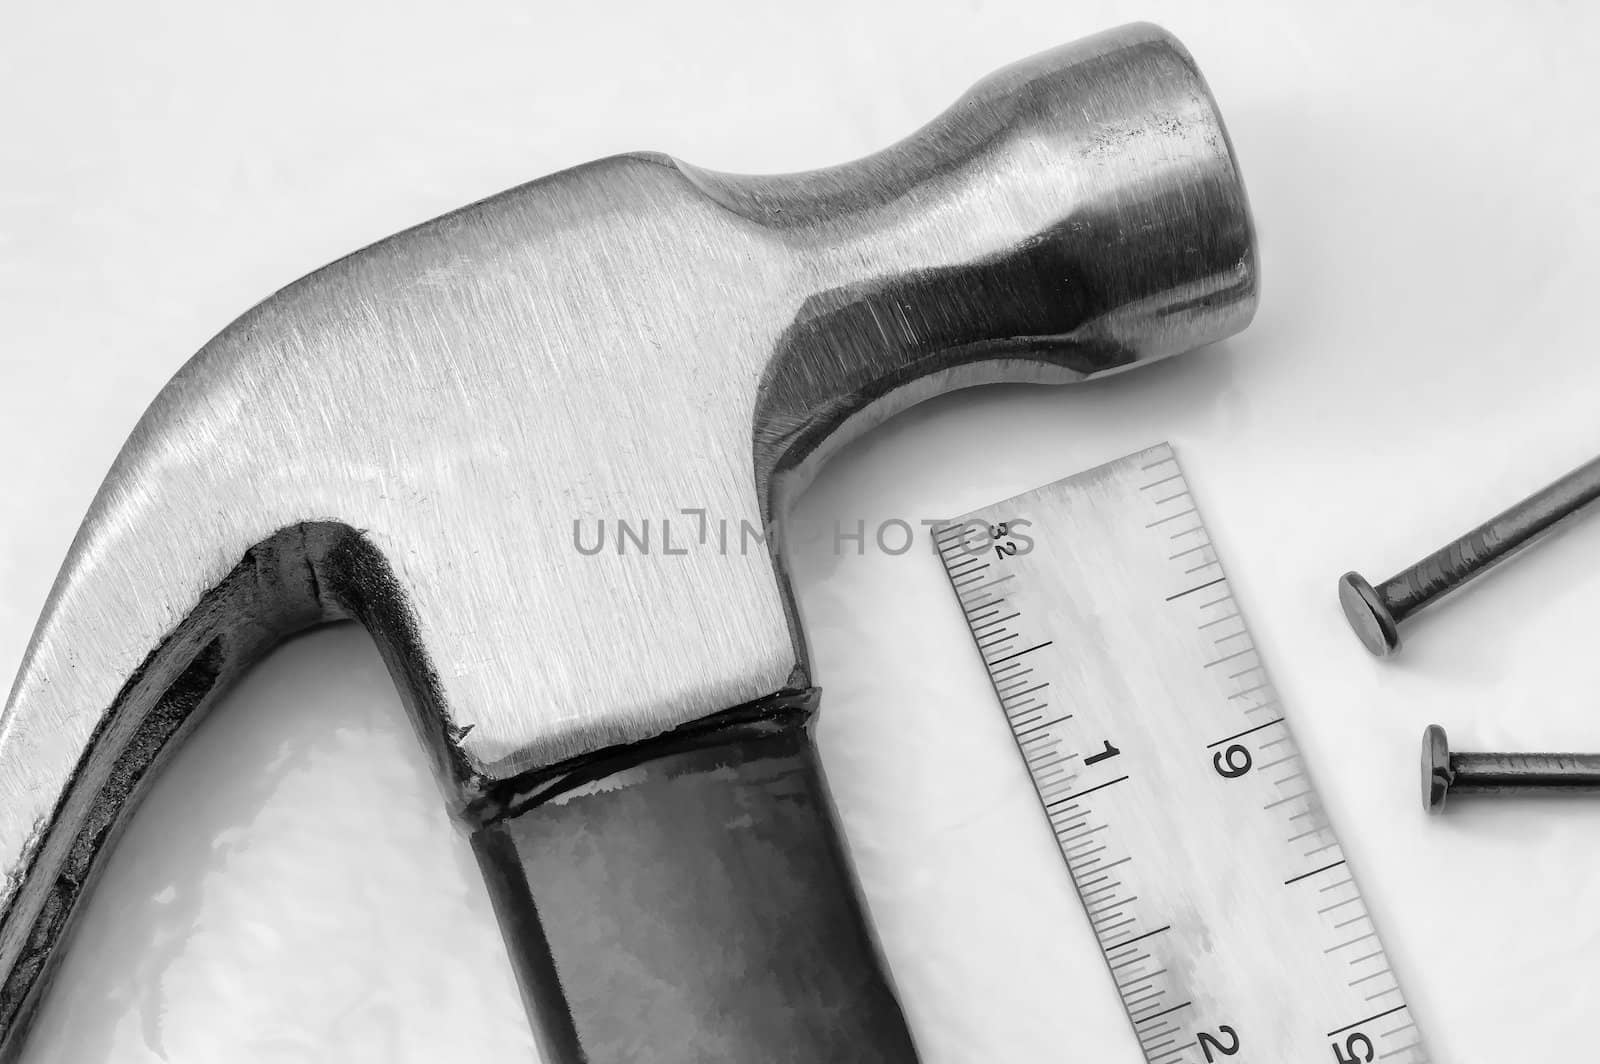 Nails Hammer and Ruler up Close by wolterk